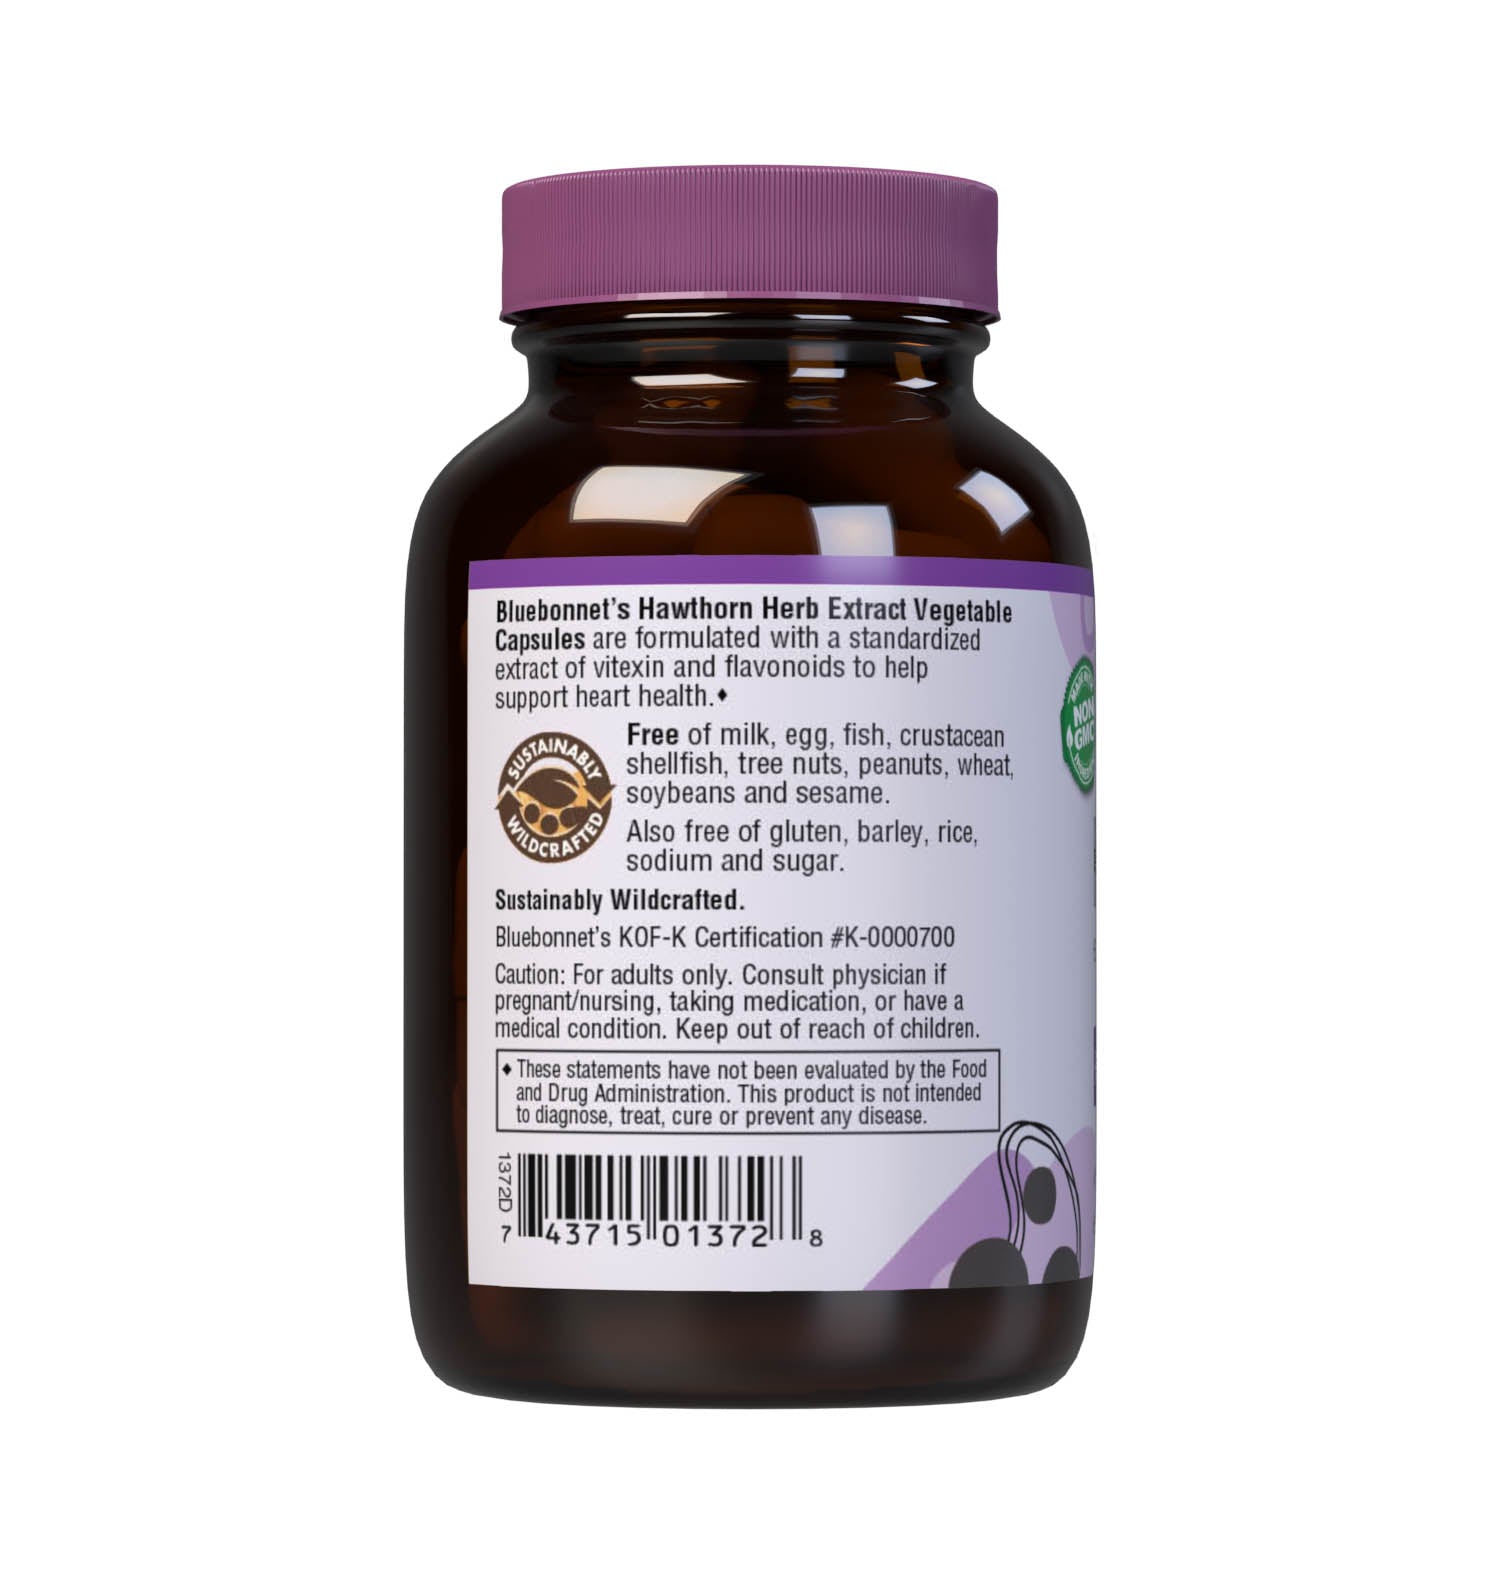 Bluebonnet’s Hawthorn Herb Extract 60 Vegetable Capsules contain a standardized extract of flavonoids and vitexin, the most researched active constituents found in hawthorn. A clean and gentle water-based extraction method is employed to capture and preserve hawthorn’s most valuable components. Description panel. #size_60 count